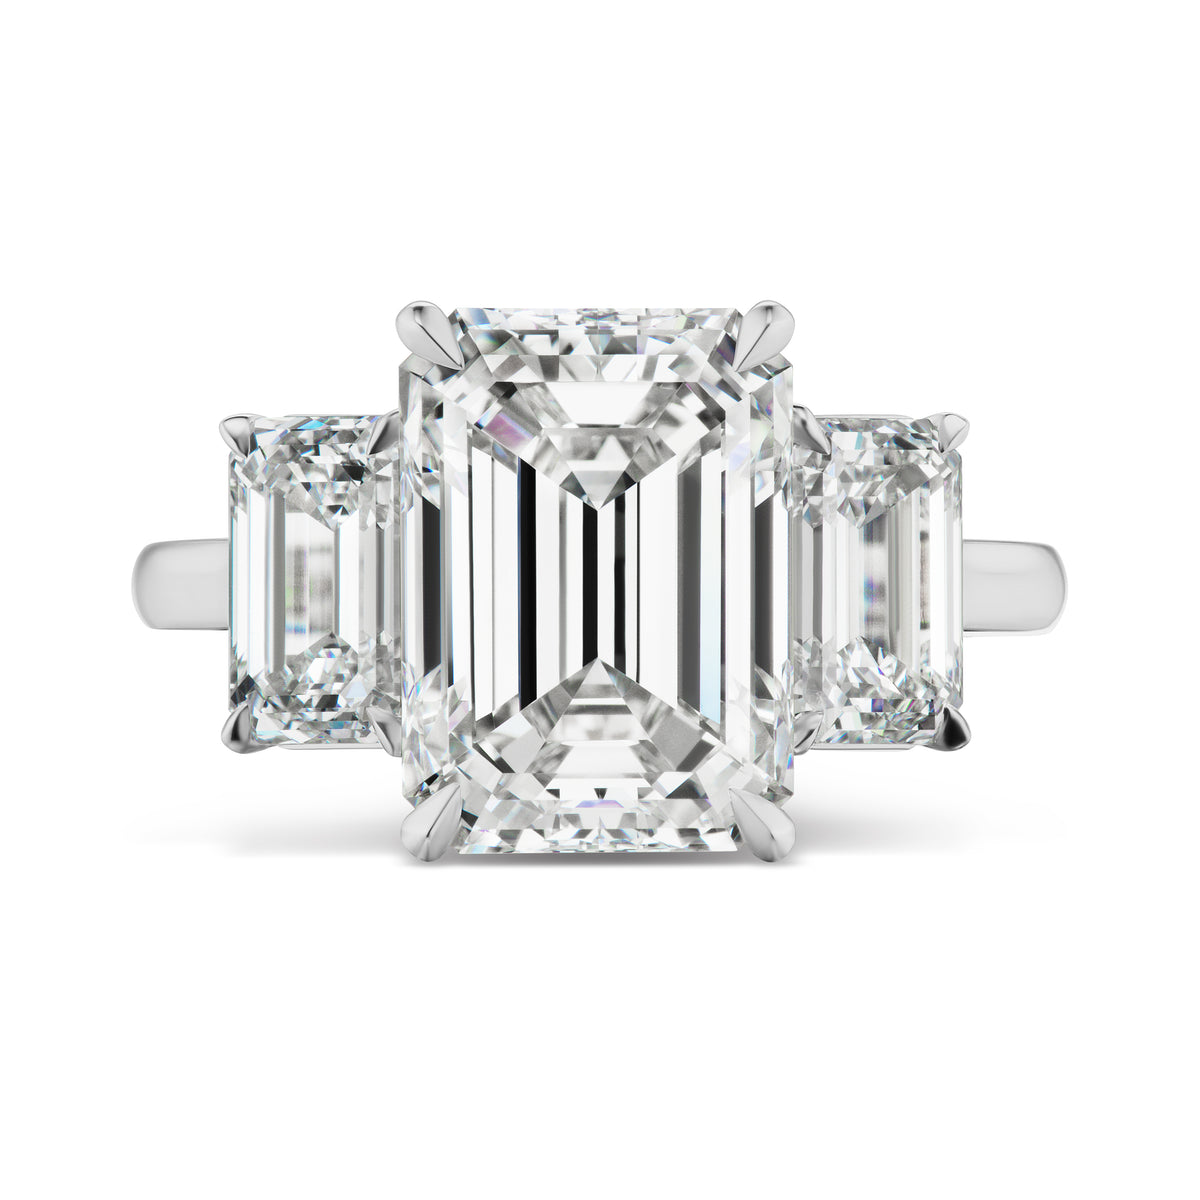 Emerald Cut Diamond Engagement Ring with Emerald Cut Side Stones